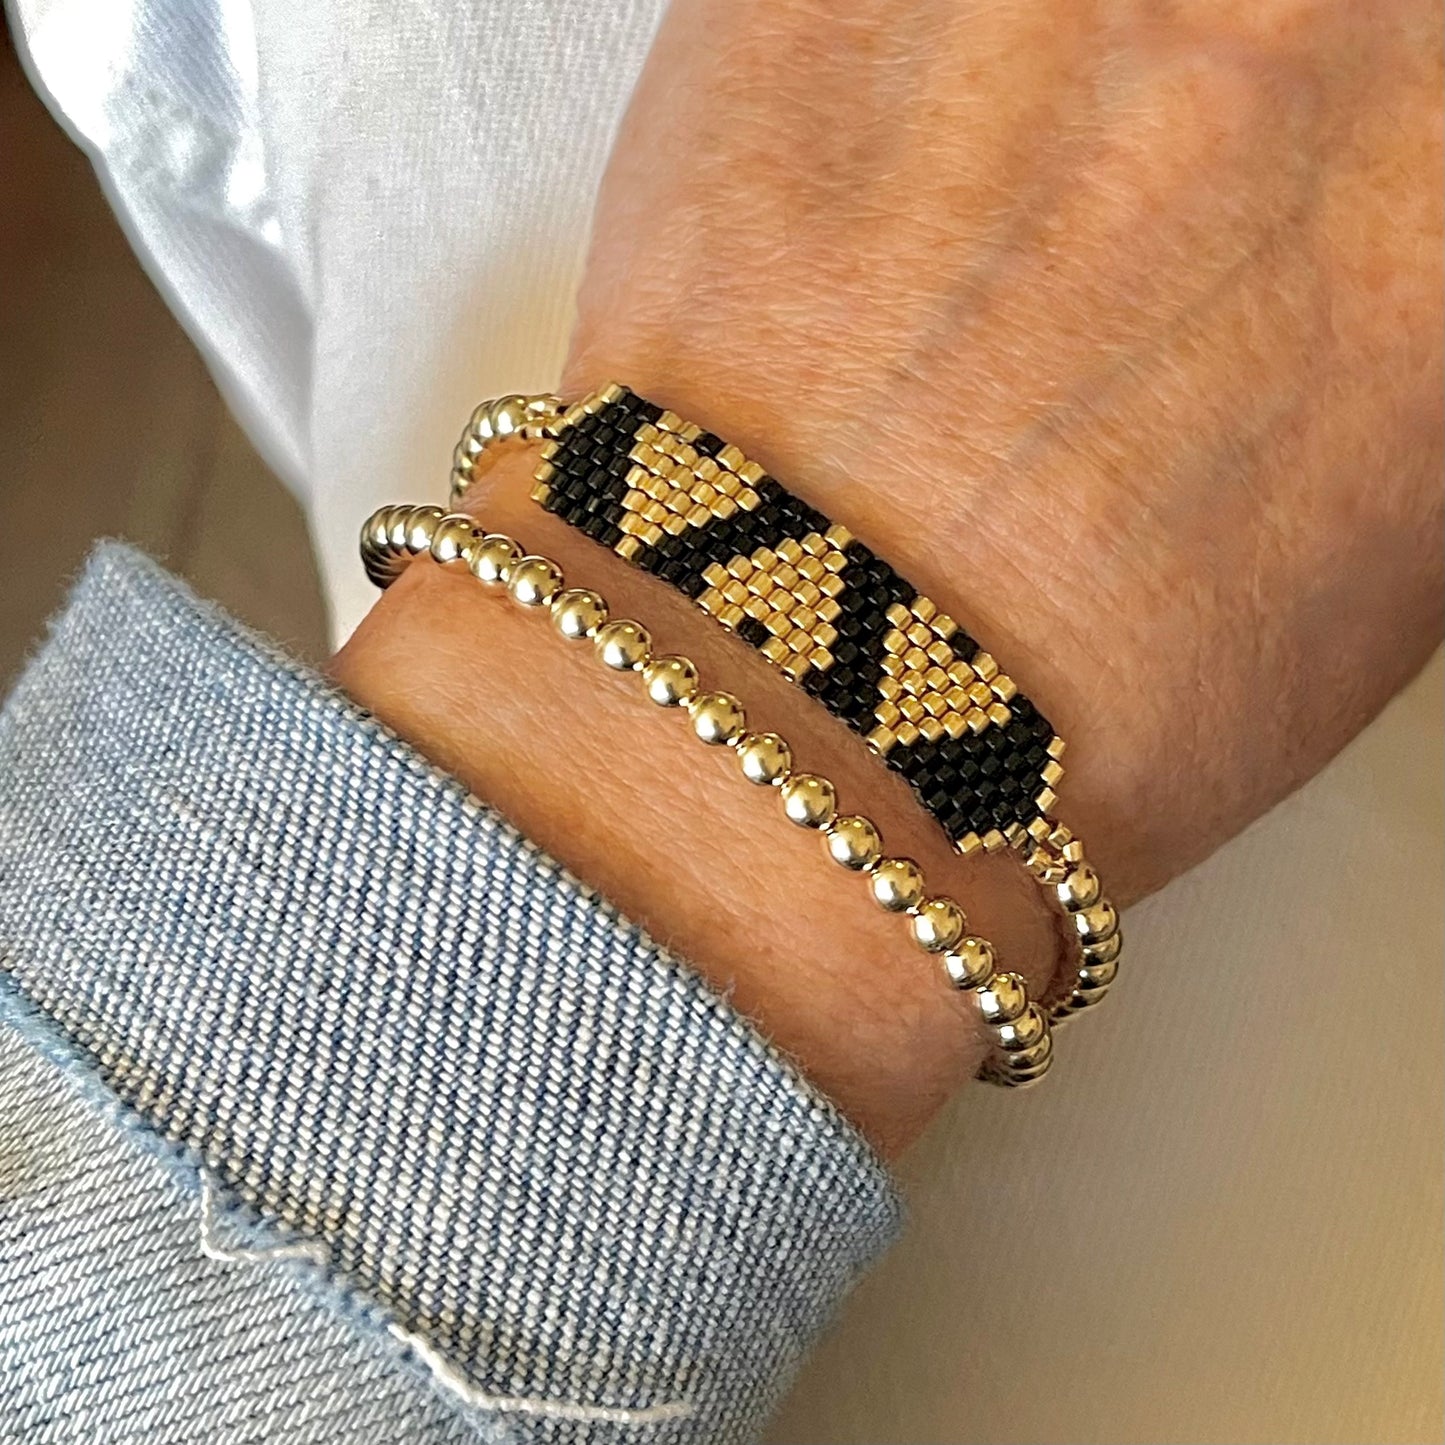 Black and gold triple heart band with 4mm 14K gold filled stretch bracelet. Tarnish resistant and waterproof. Made in NYC.